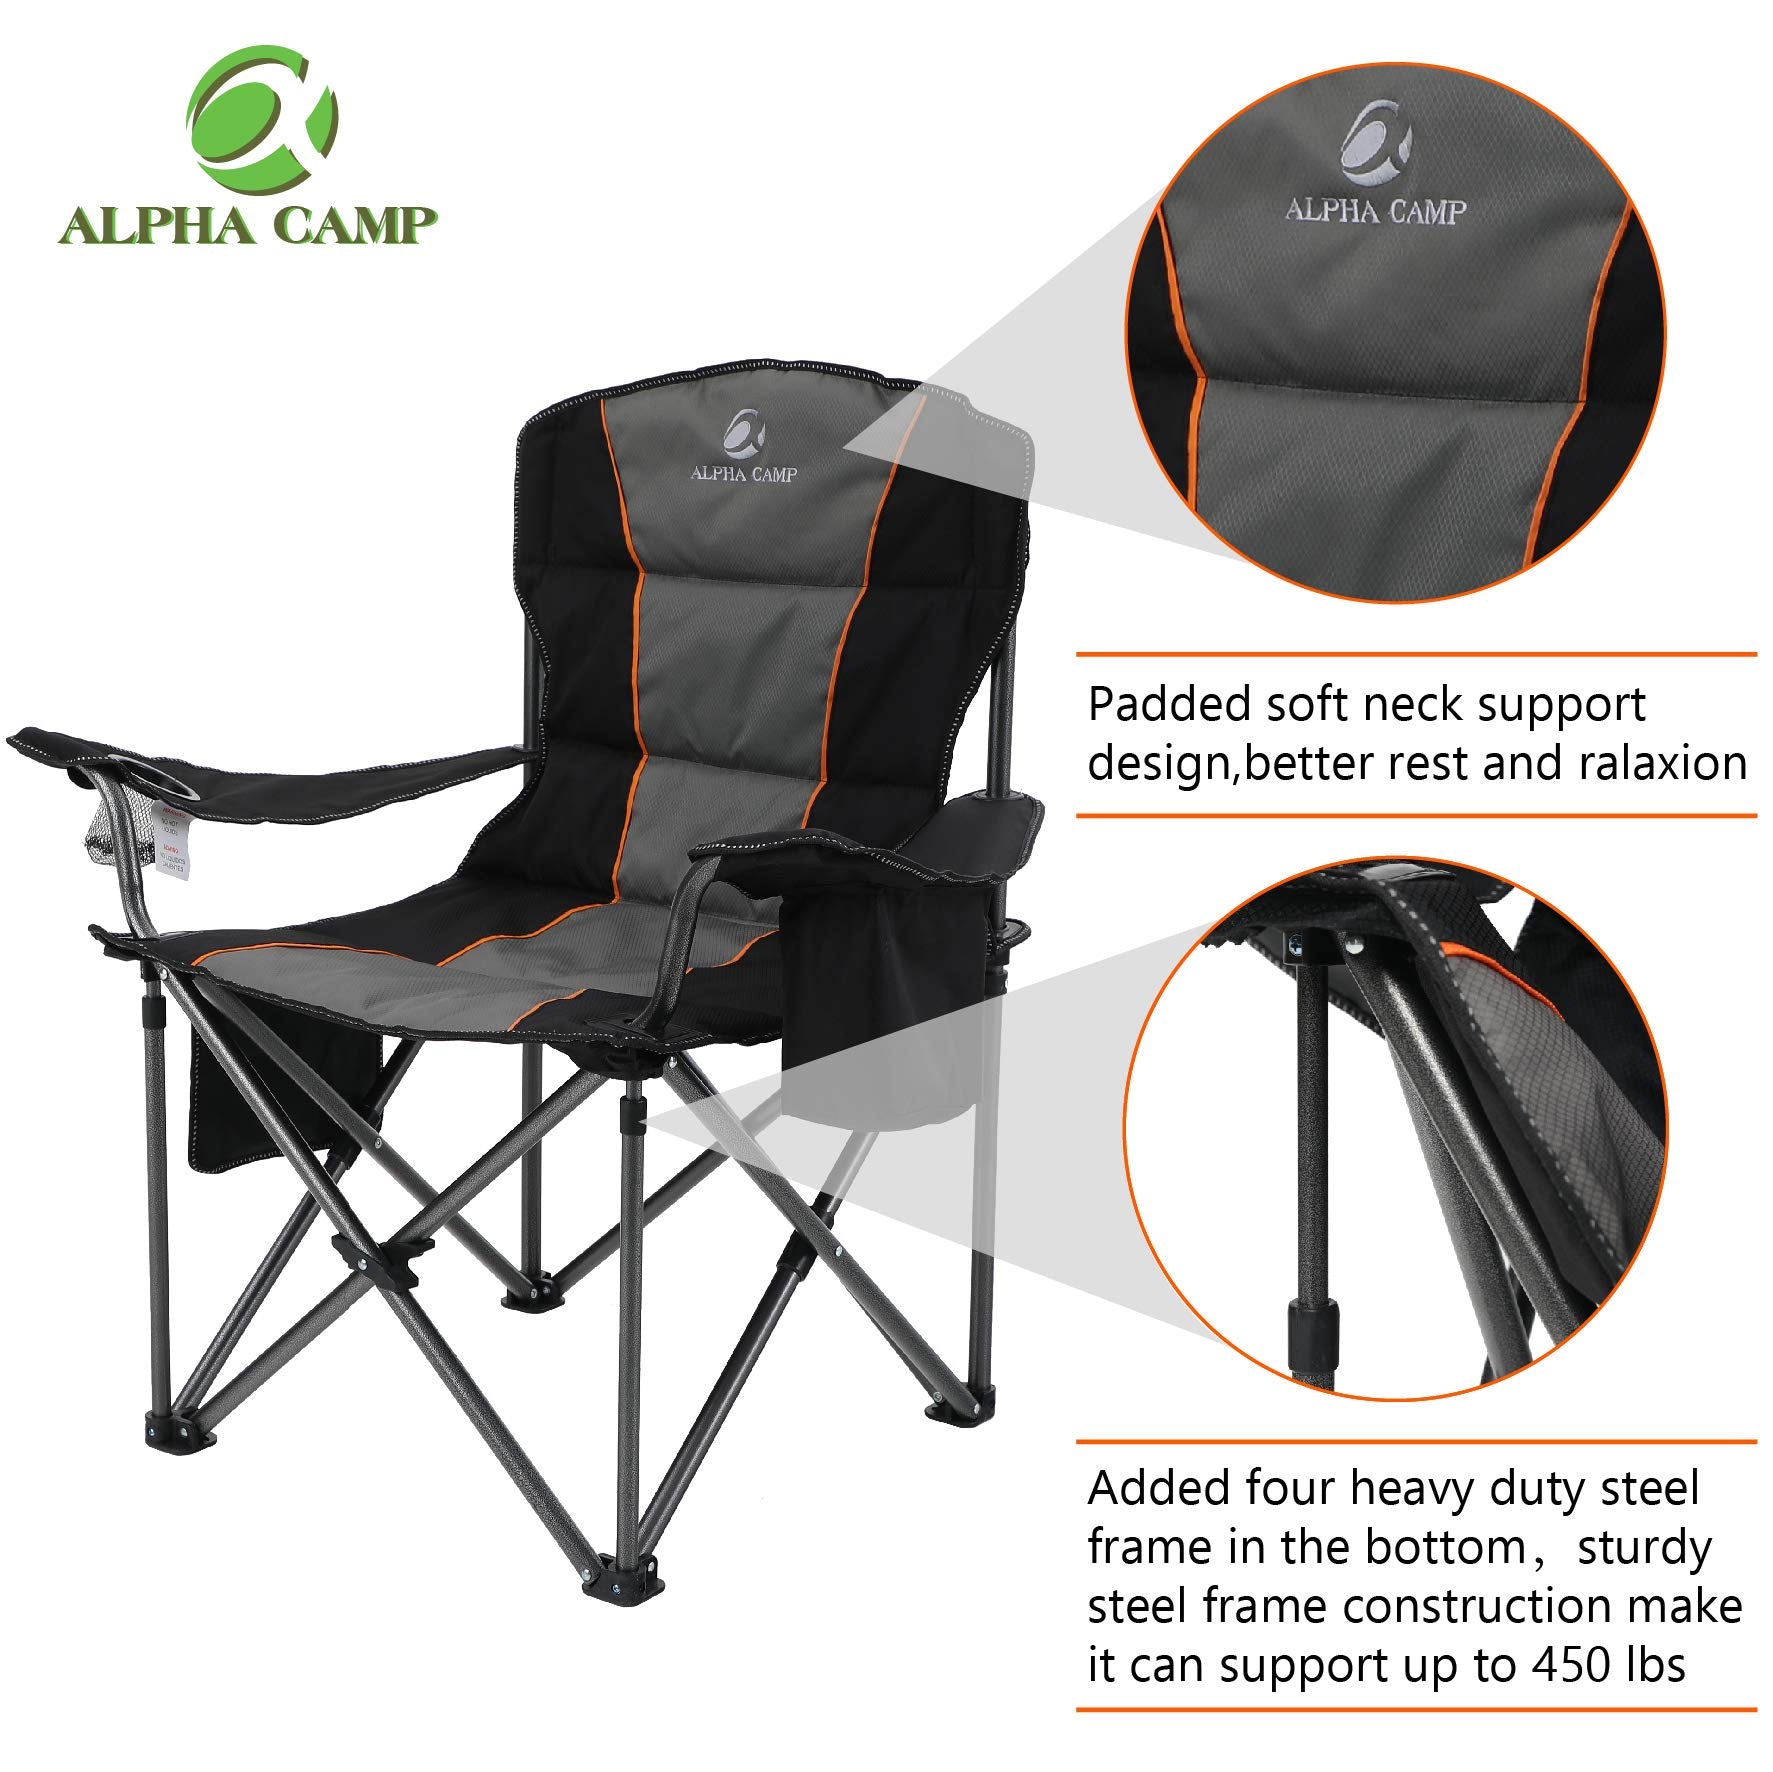 Alpha Camp Oversized Camping Folding Chair Heavy Duty Support 450 lbs Oversized Steel Frame Collapsible Padded Arm Chair with Cup Holder Quad Lumbar